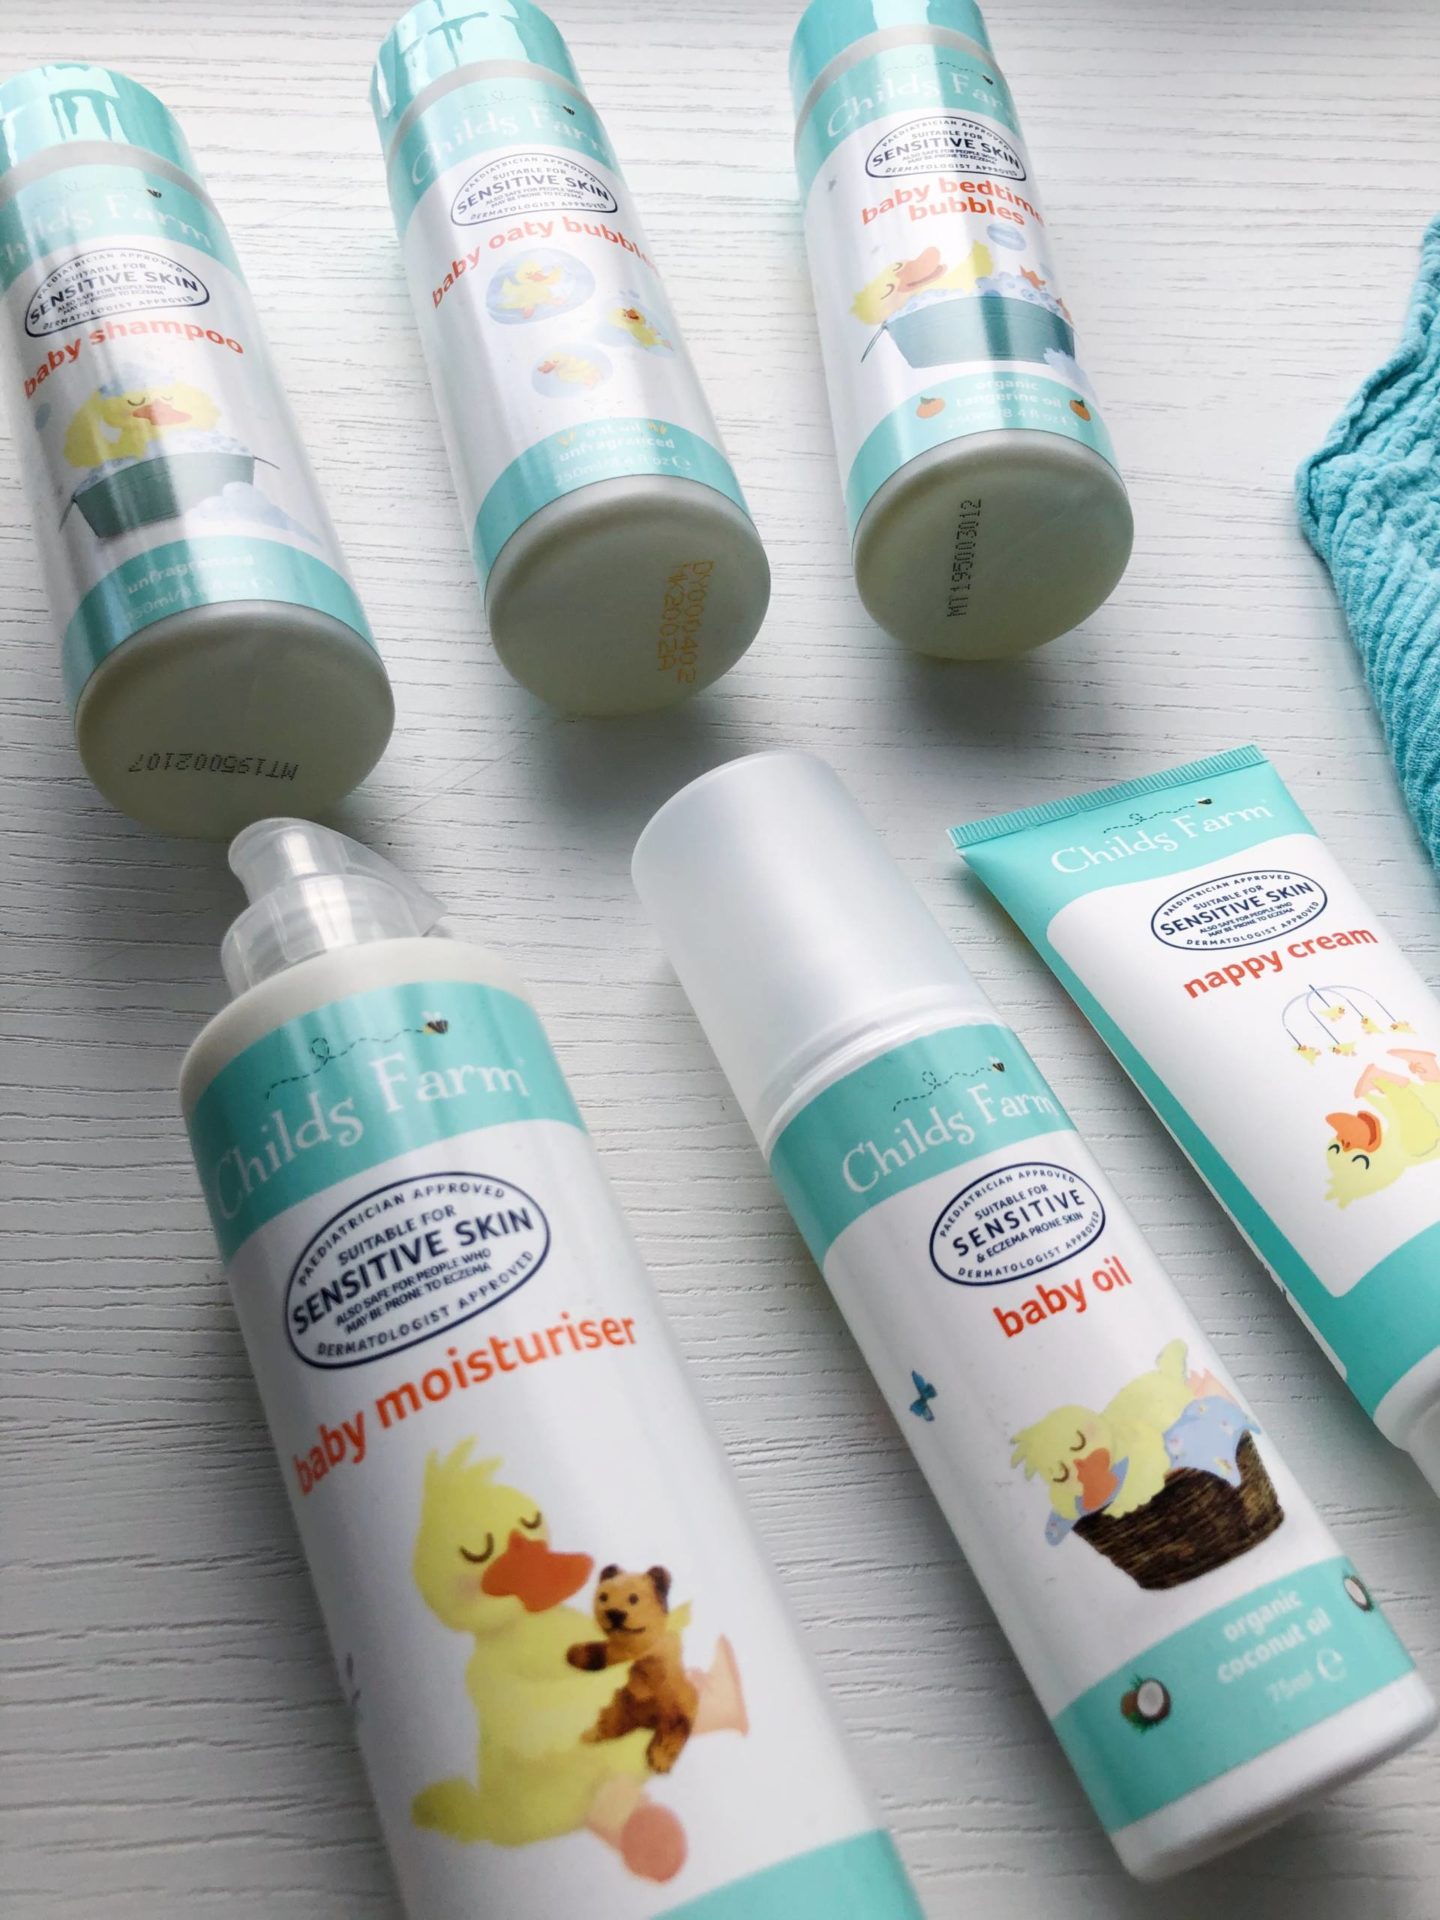 Childs Farm Best Vegan & Cruelty Free Products 